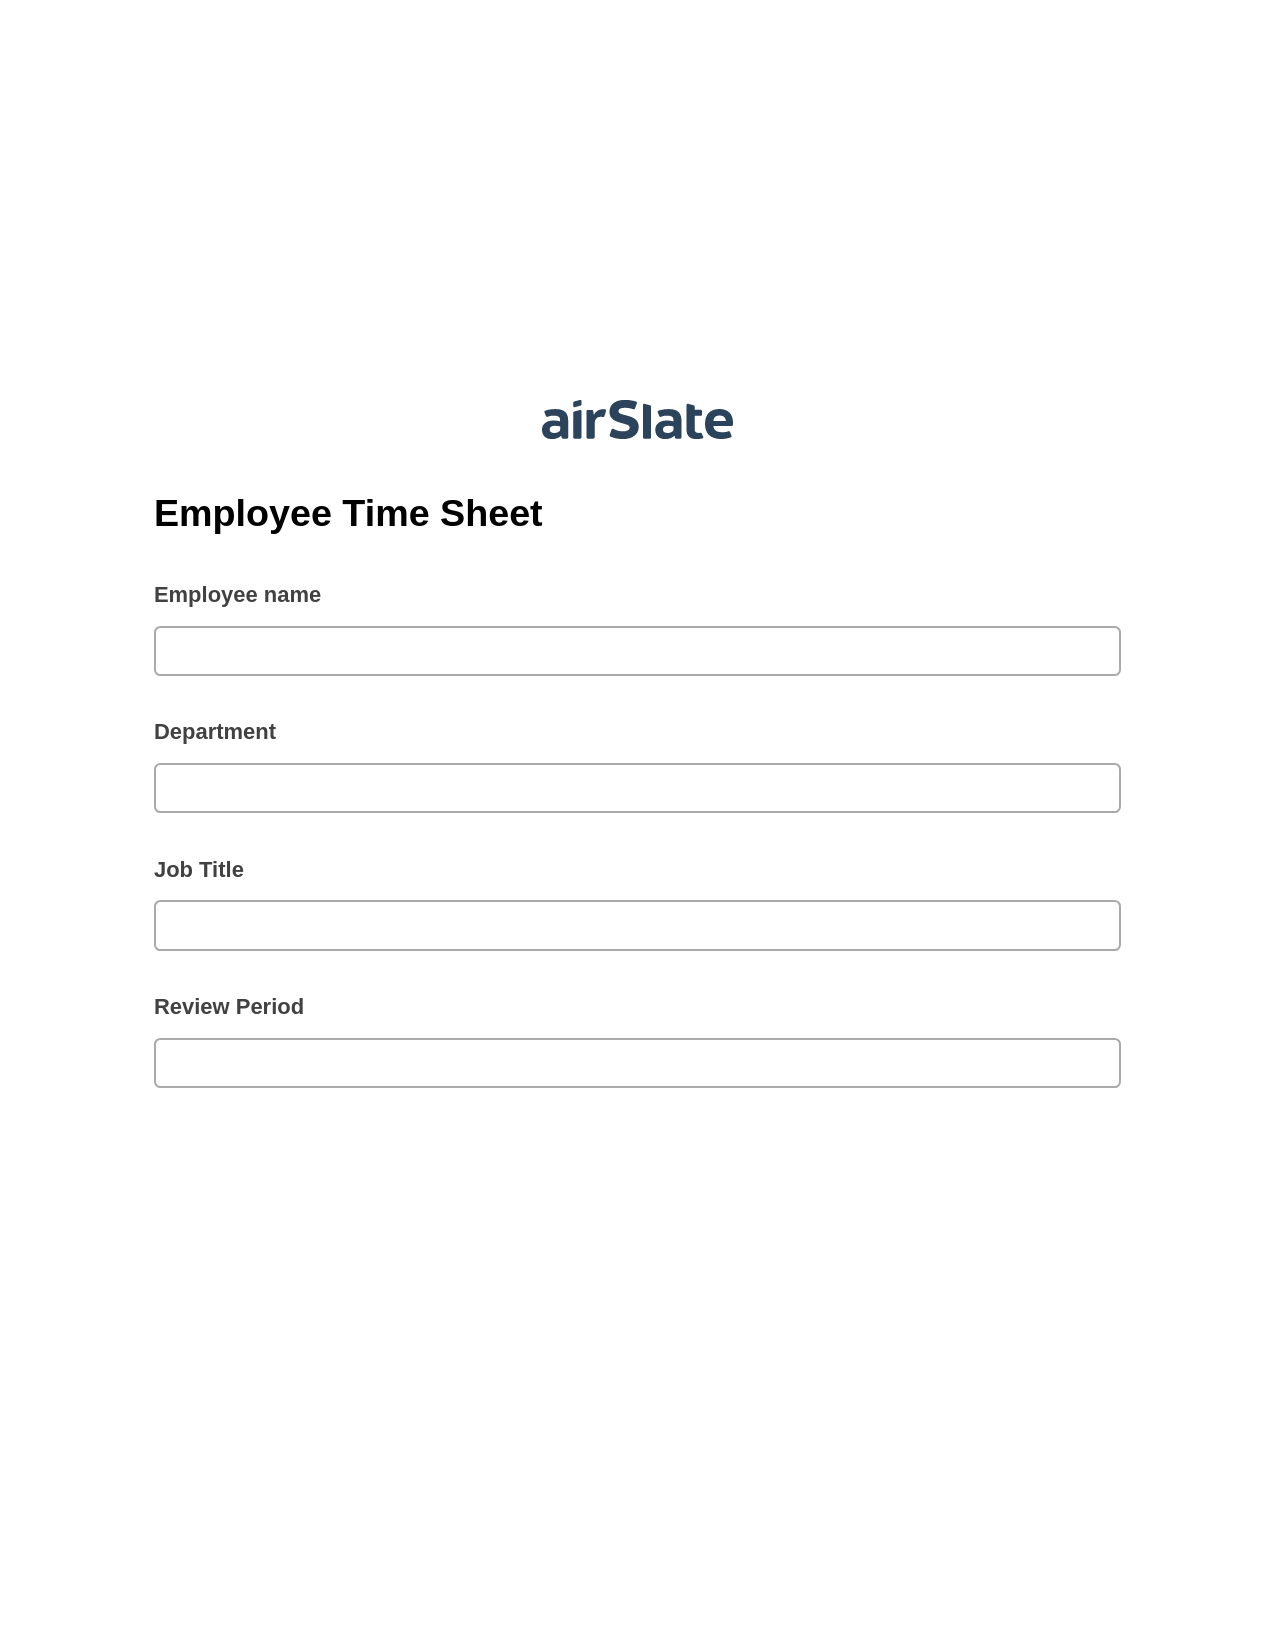 Employee Time Sheet Prefill from NetSuite records, Create Salesforce Records Bot, Webhook Postfinish Bot